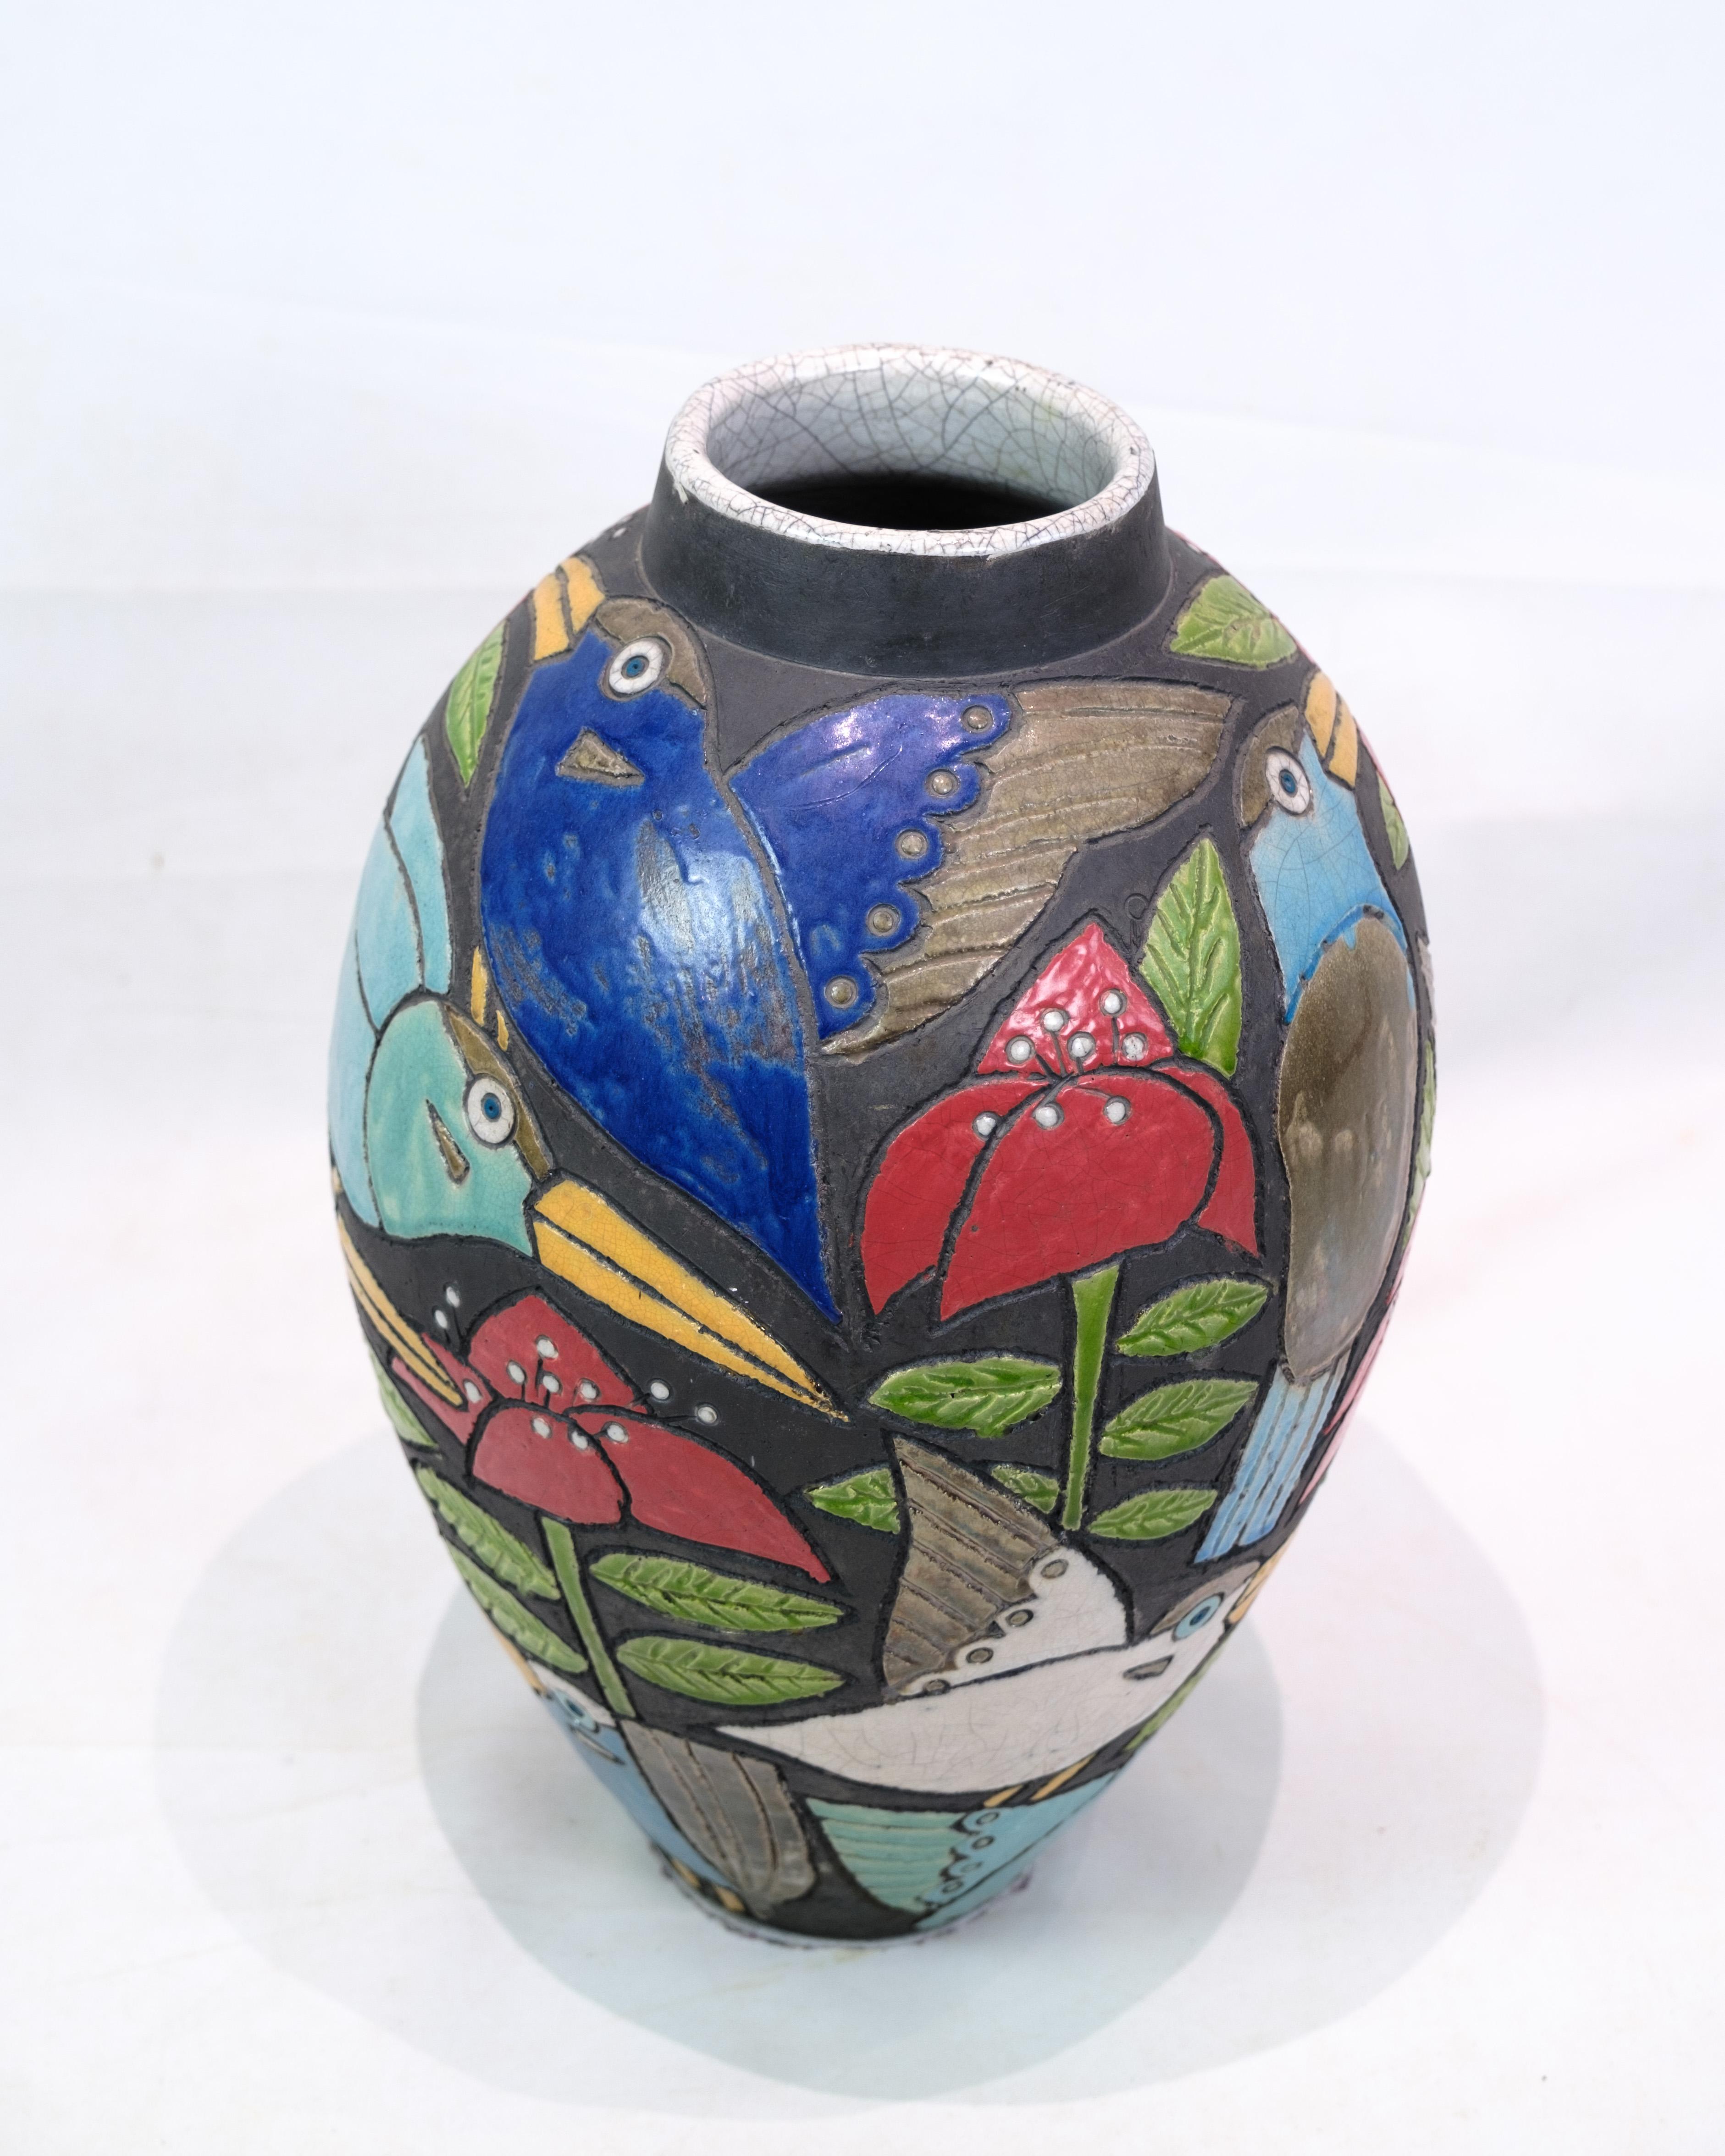 This large ceramic floor vase is a beautiful ornate object, decorated with motifs of birds and flowers in colorful shades. Designed by Dorte Friis, the vase immediately attracts attention with its vibrant and lively details.

The motifs of birds and